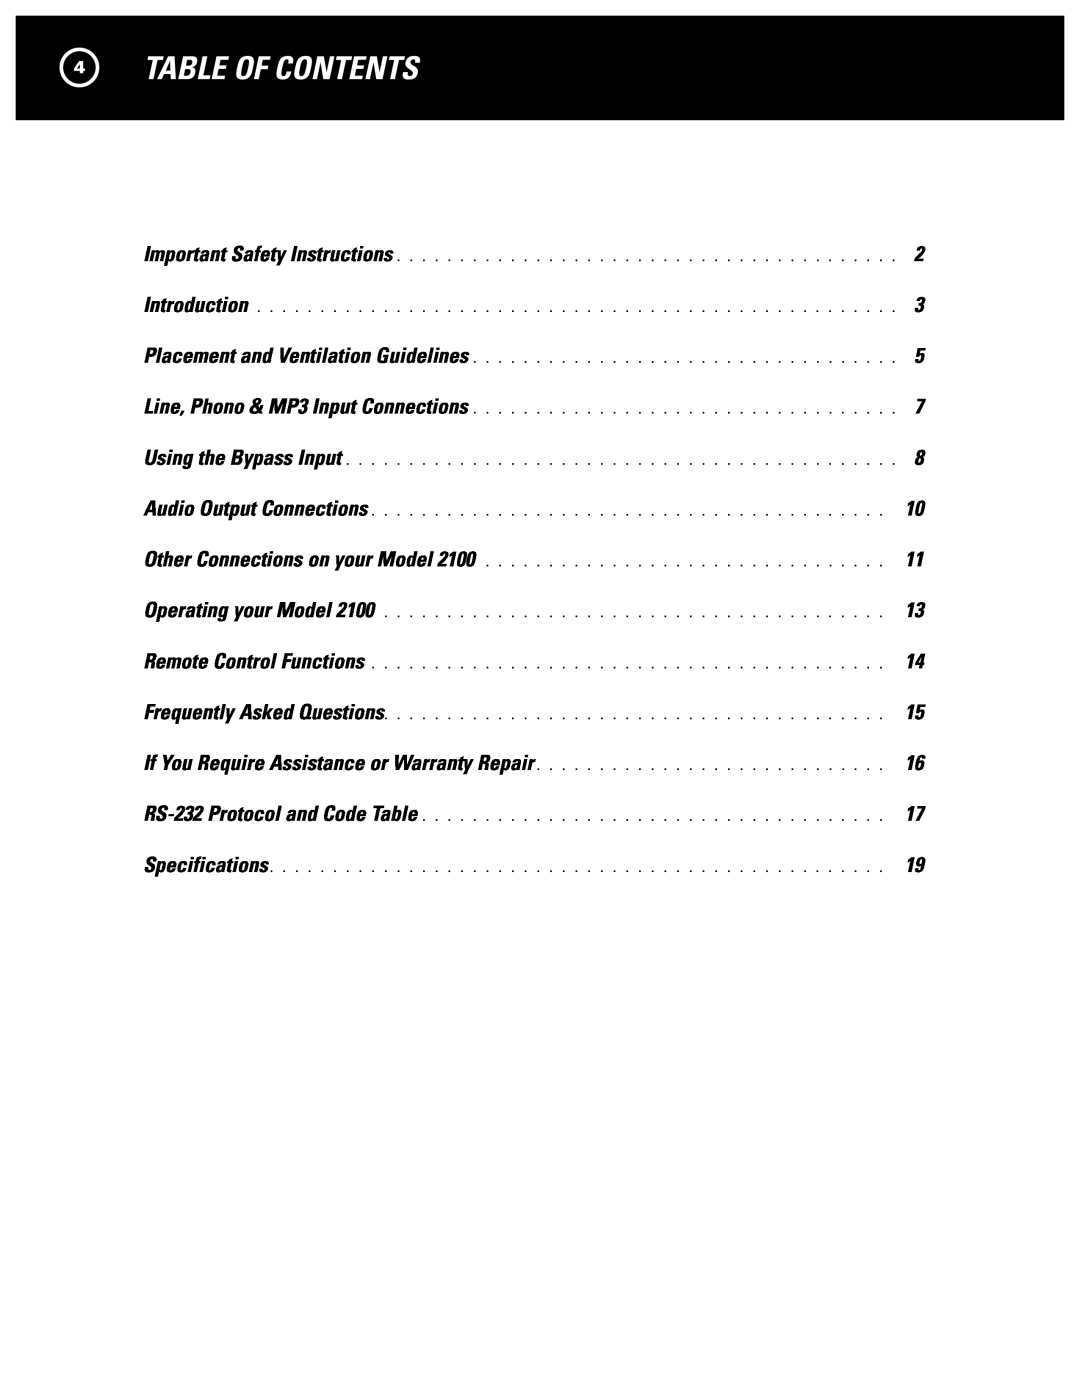 Parasound 2100 manual 4TABLE OF CONTENTS 